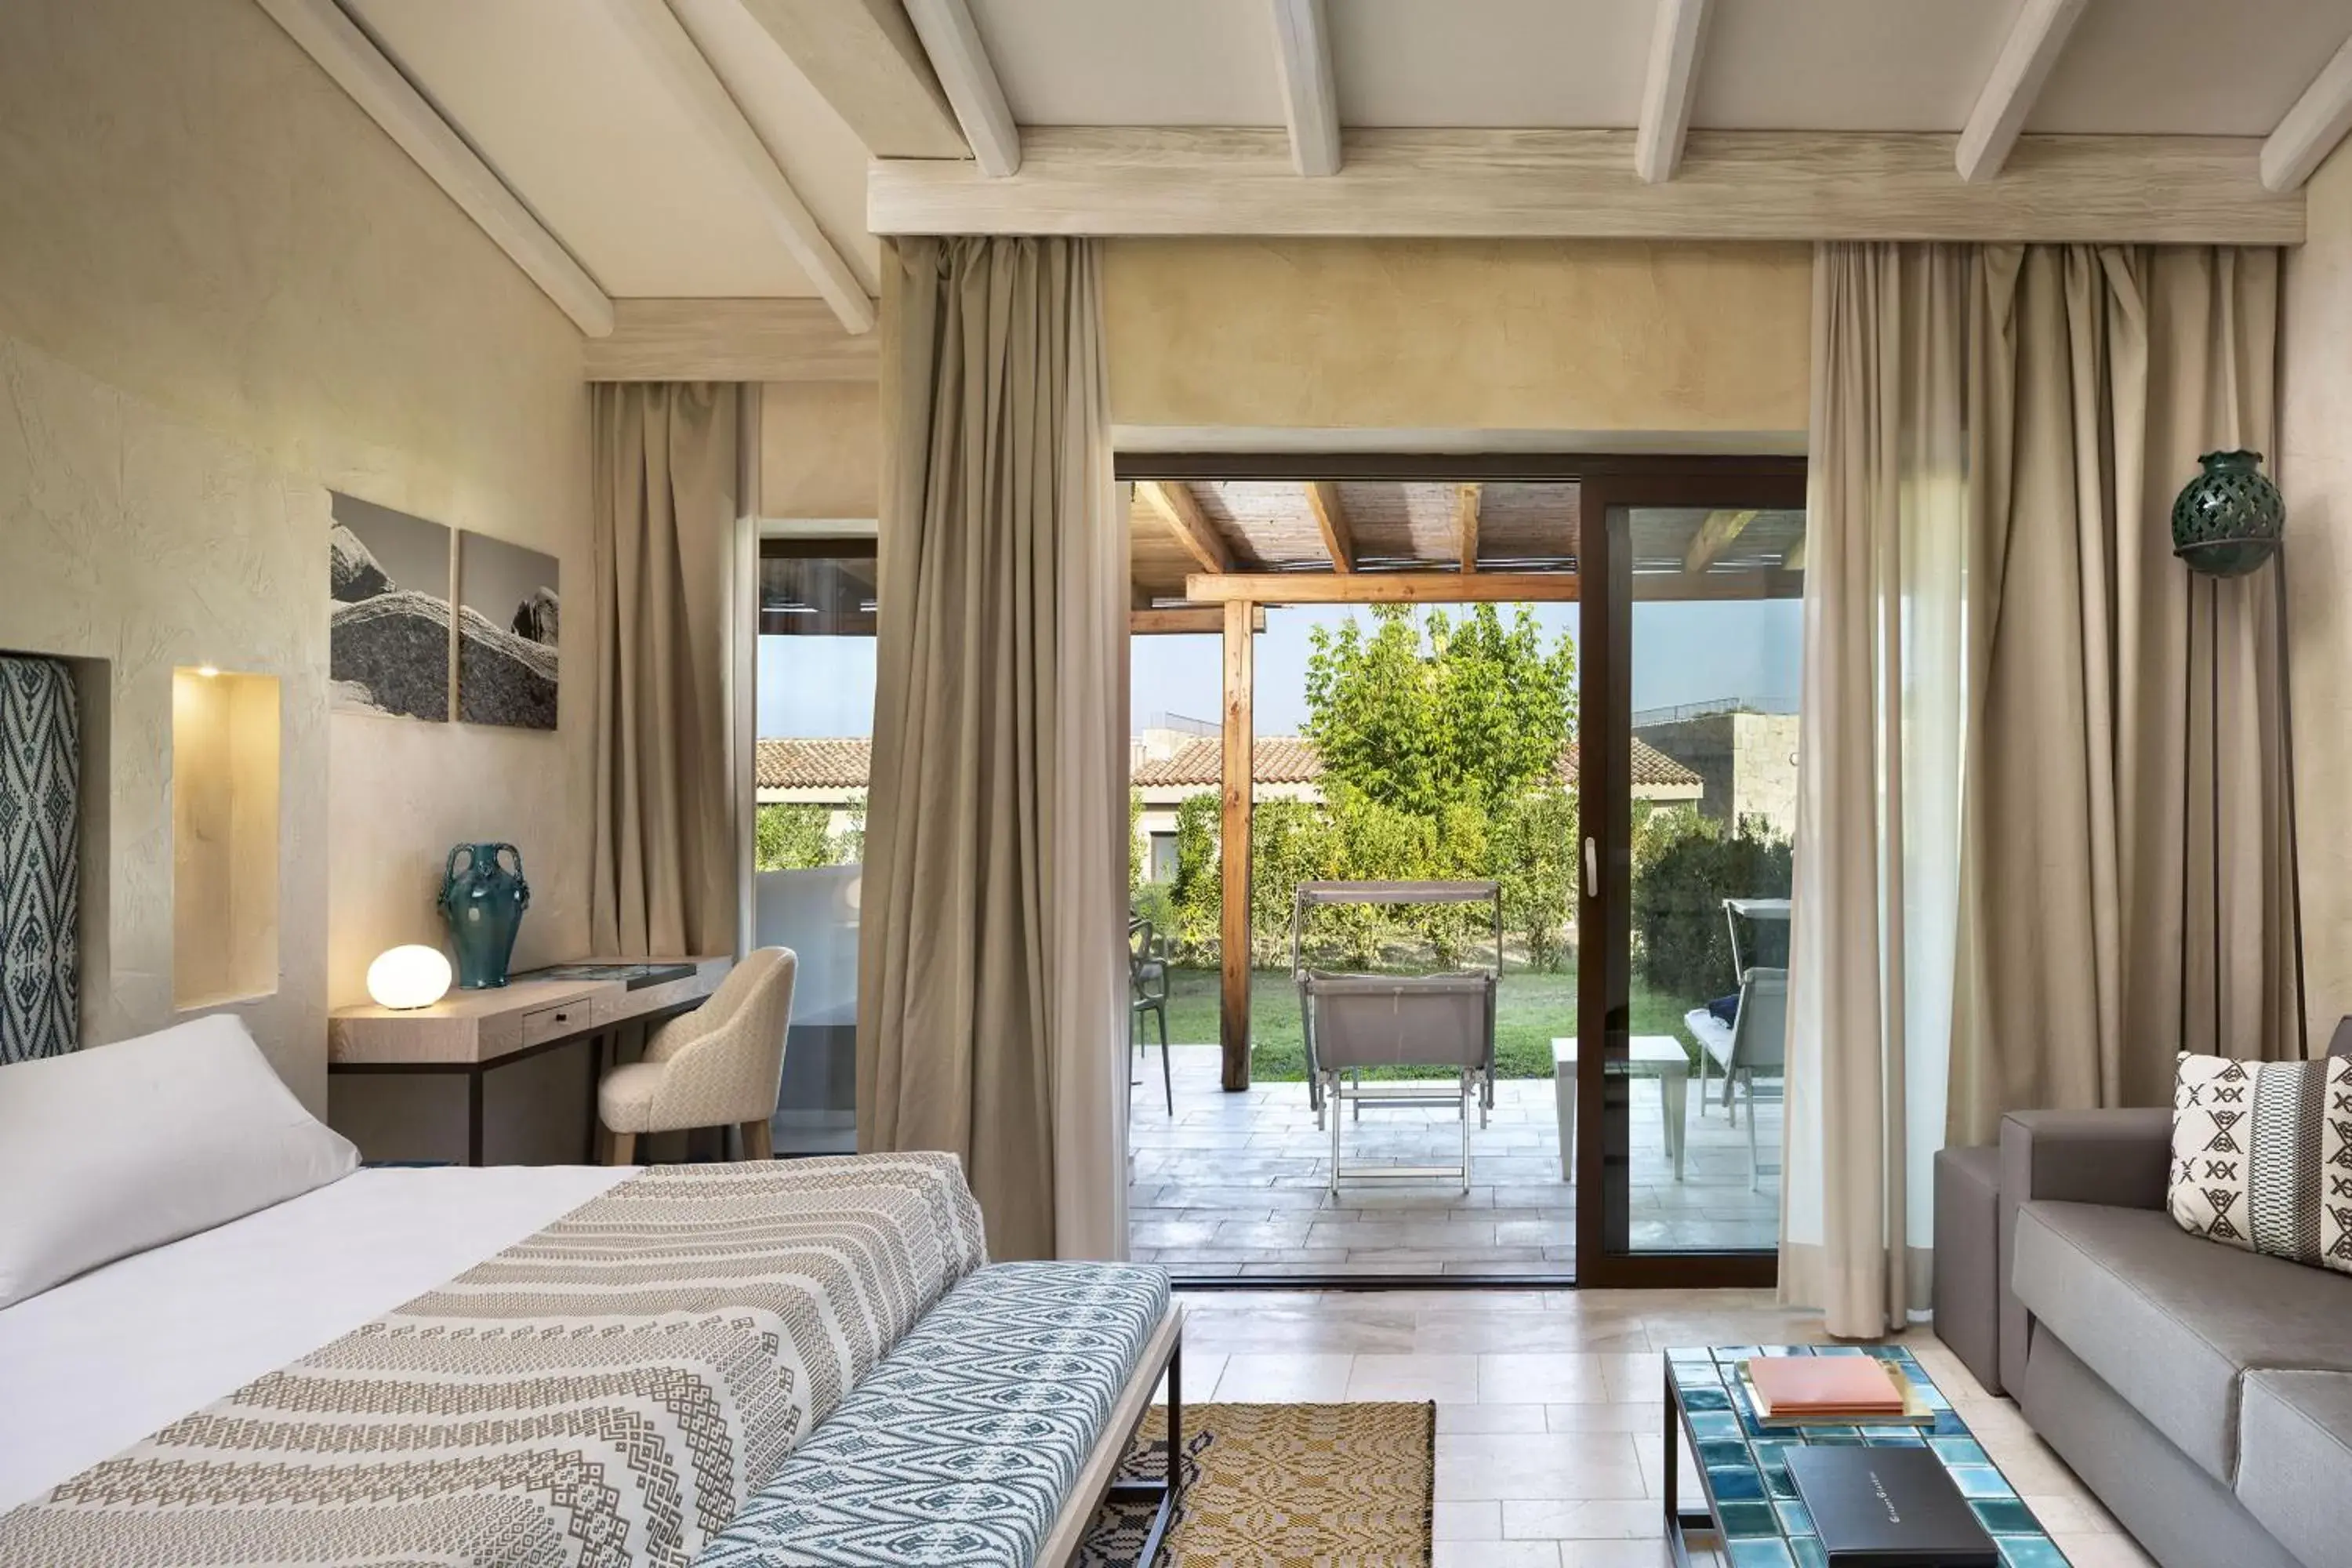 Bedroom in Baglioni Resort Sardinia - The Leading Hotels of the World